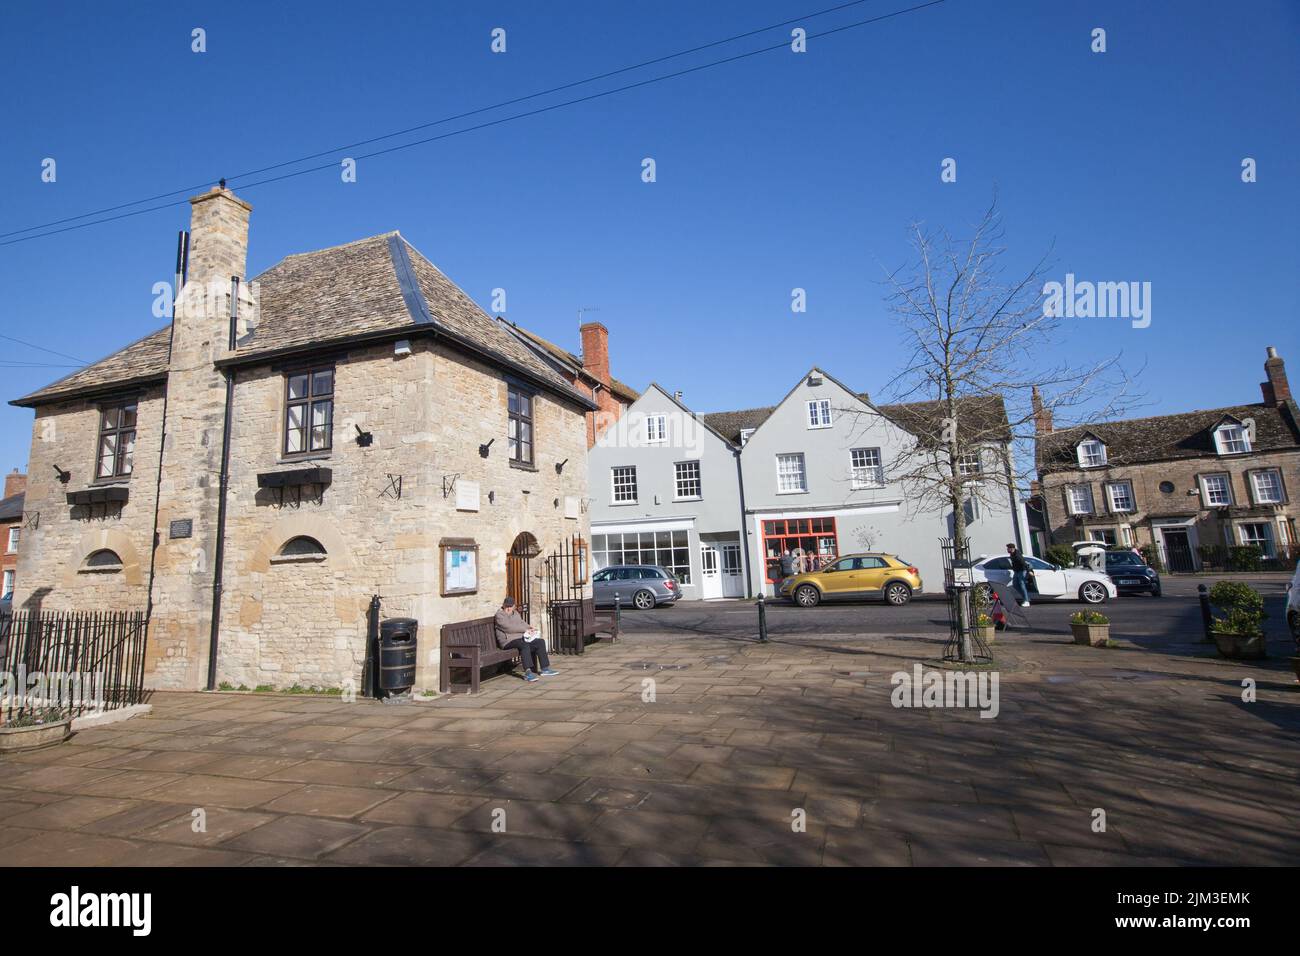 Views of Eynsham in West Oxfordshire in the UK Stock Photo